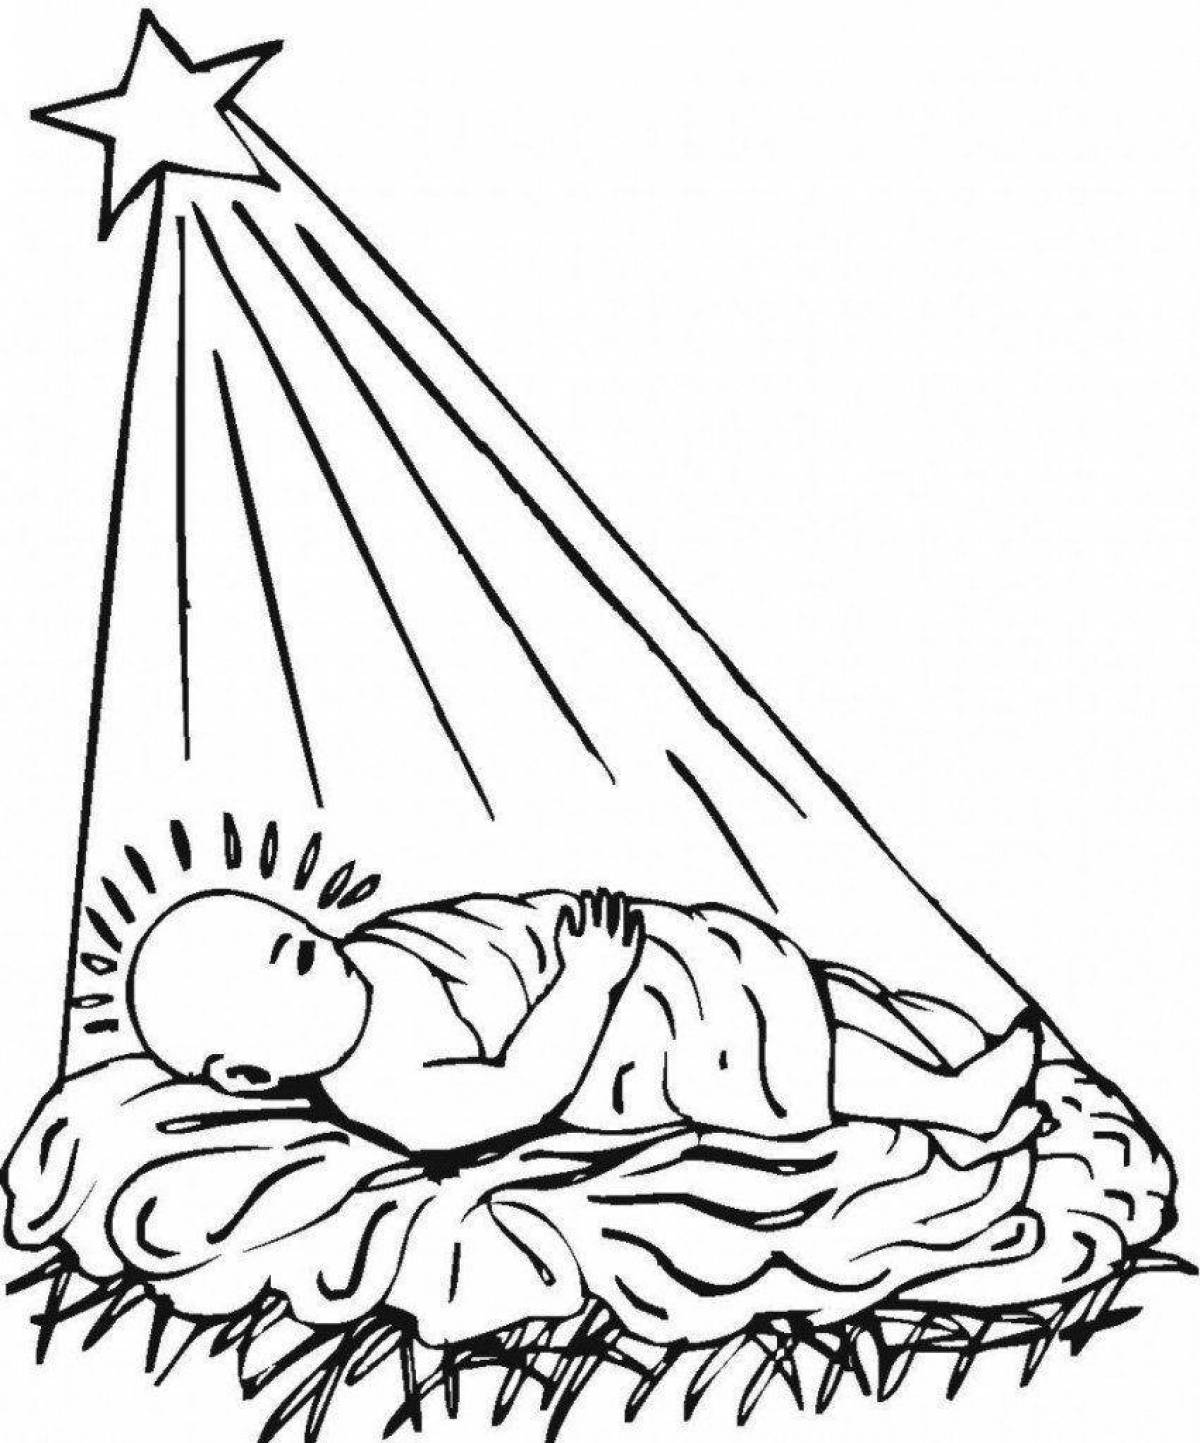 Large illustration of the birth of jesus christ coloring book